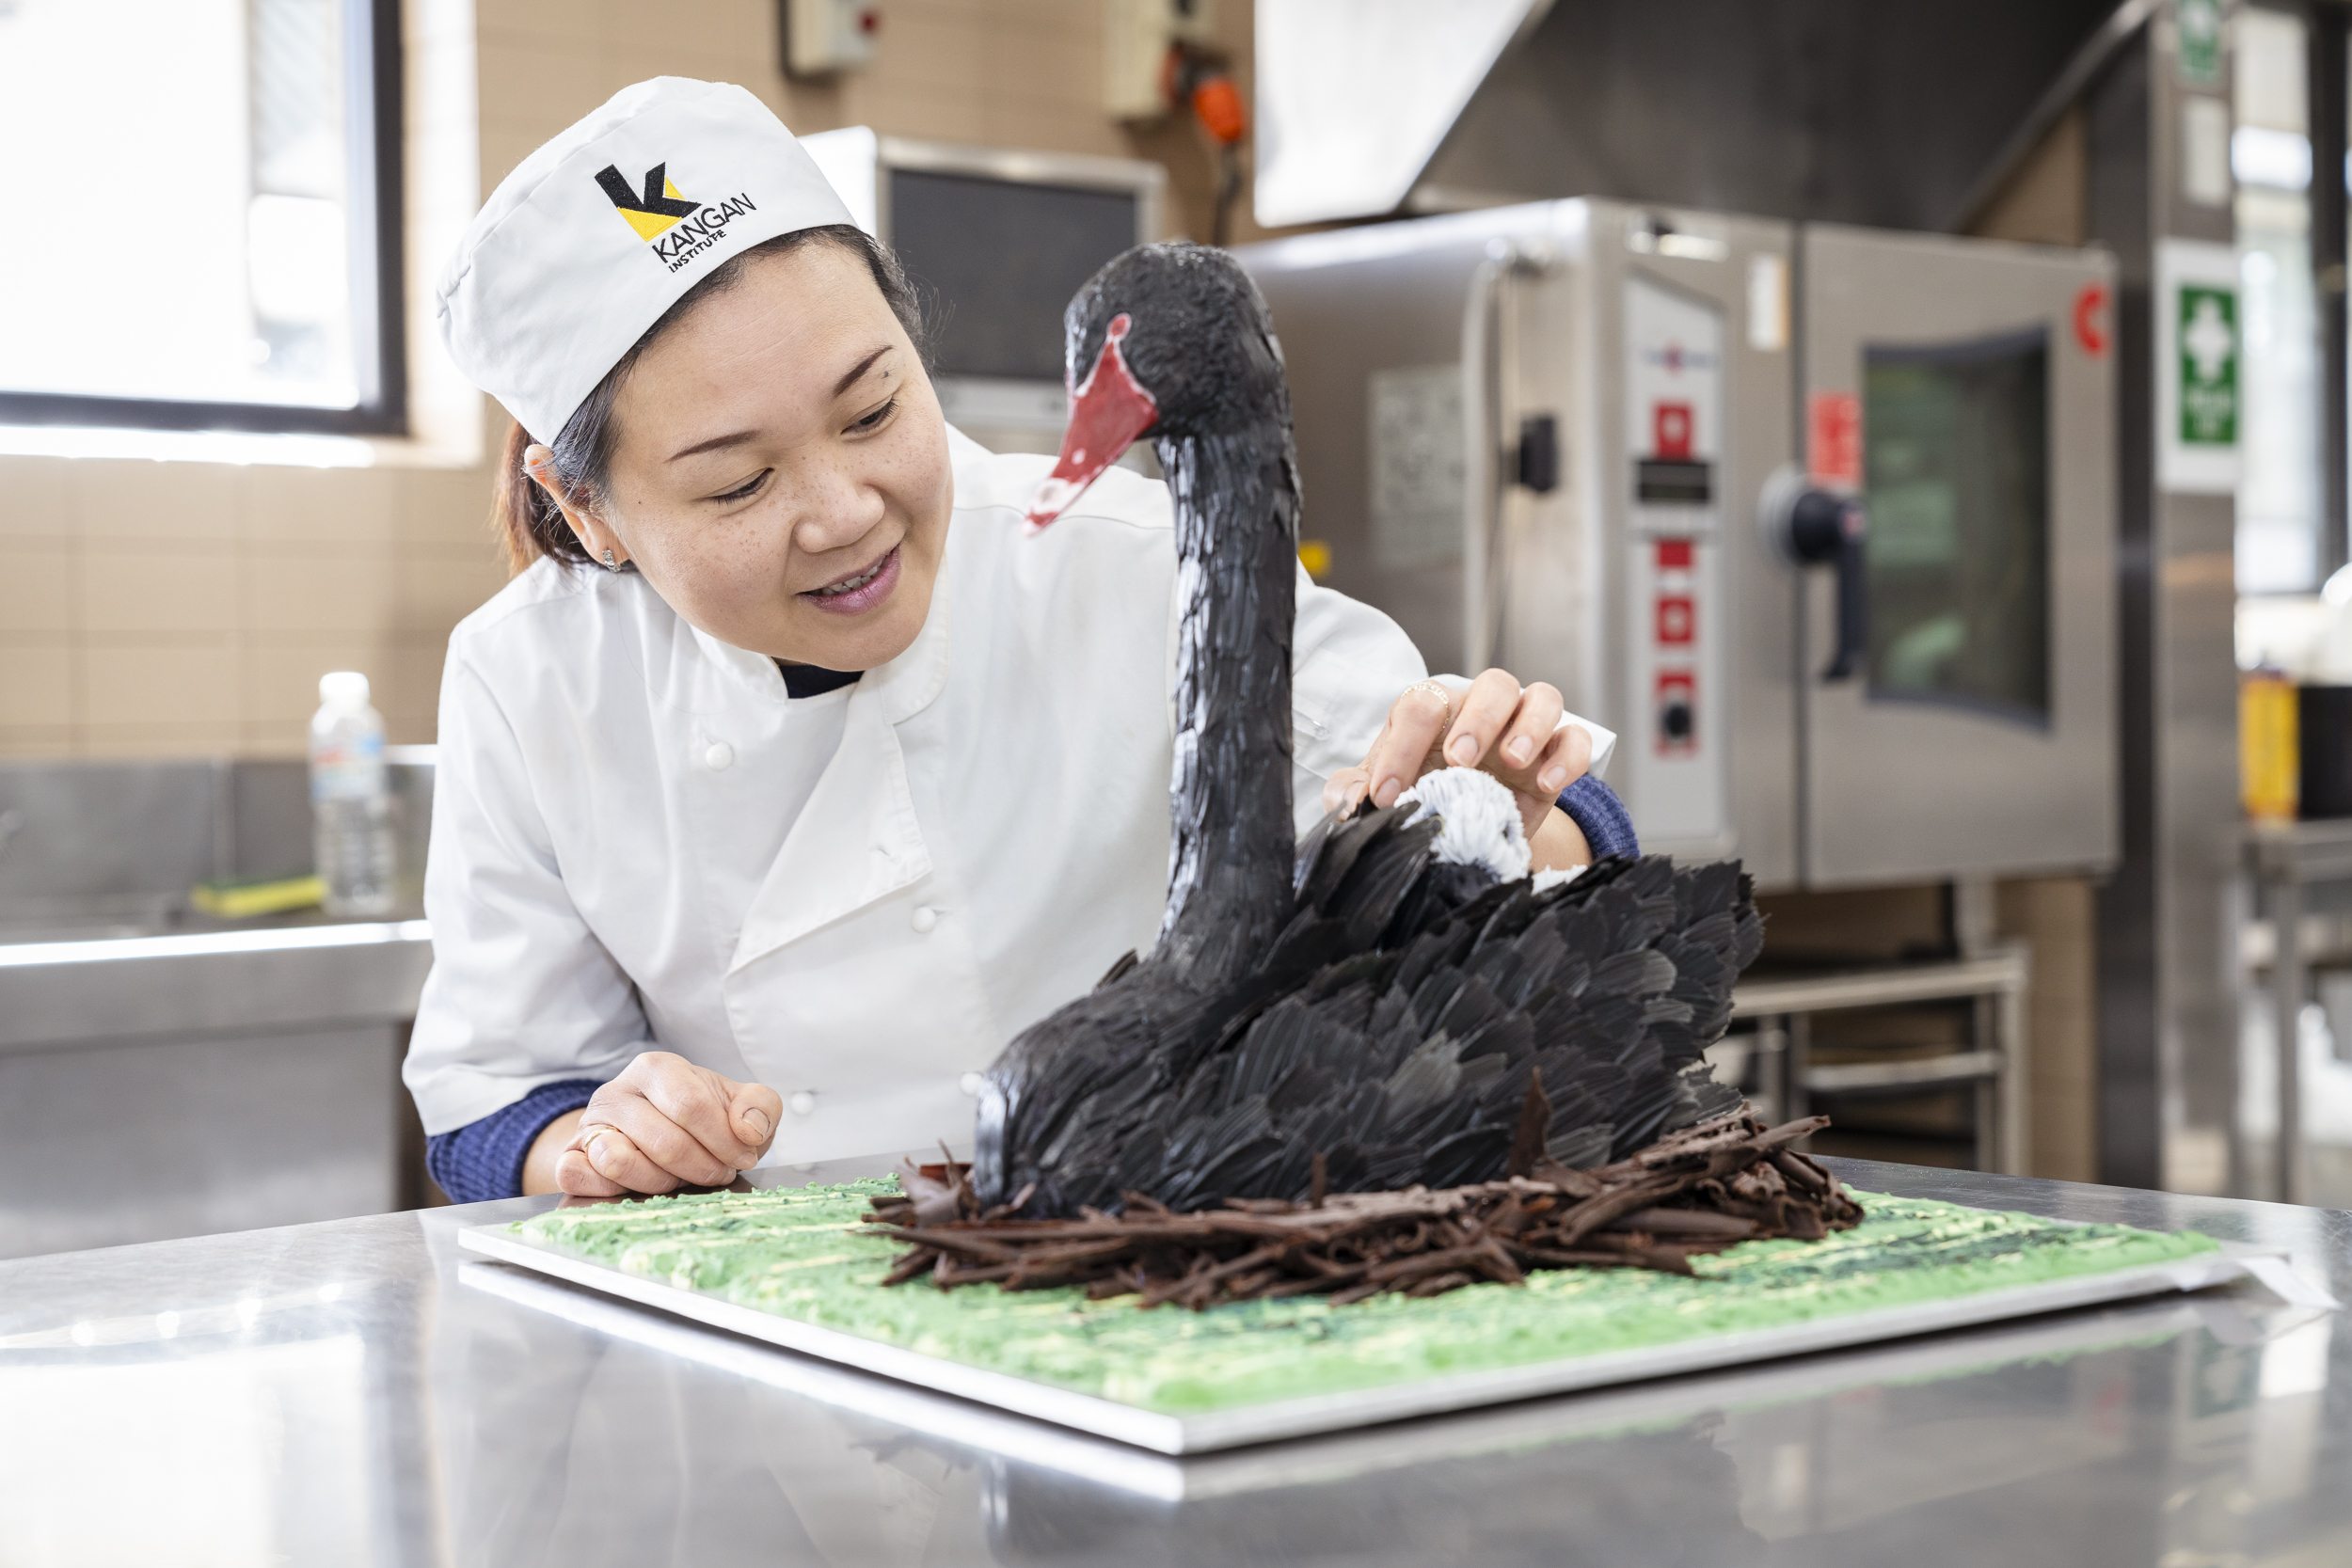 Sweet victory: a black swan and a wedding cake among baking show excellence